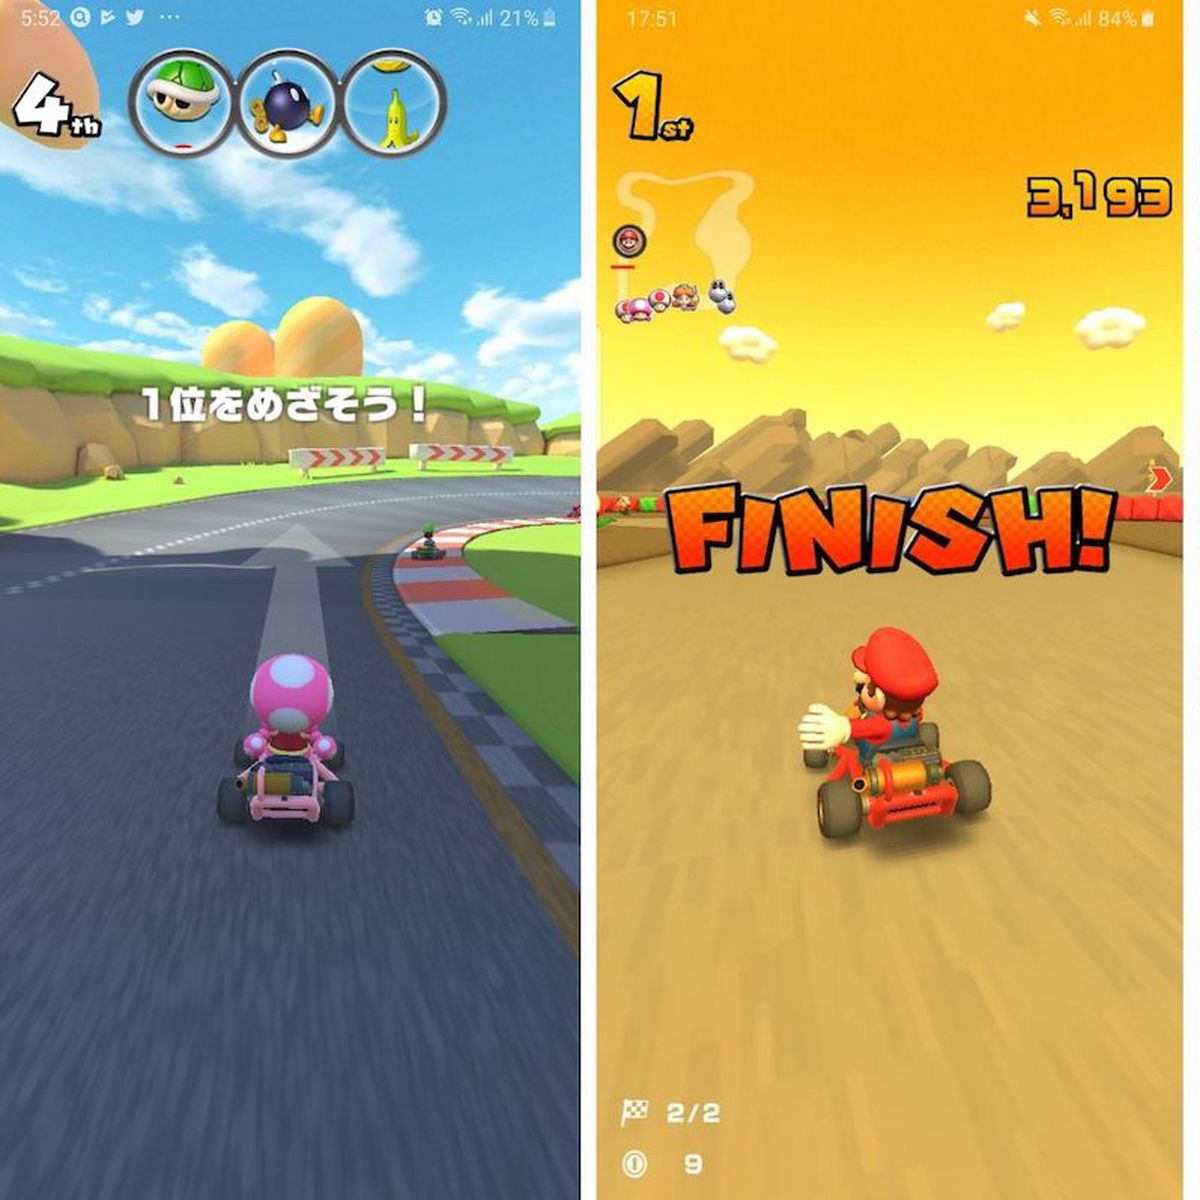 Mario Kart Tour Is Out On iOS And Android Today - LADbible